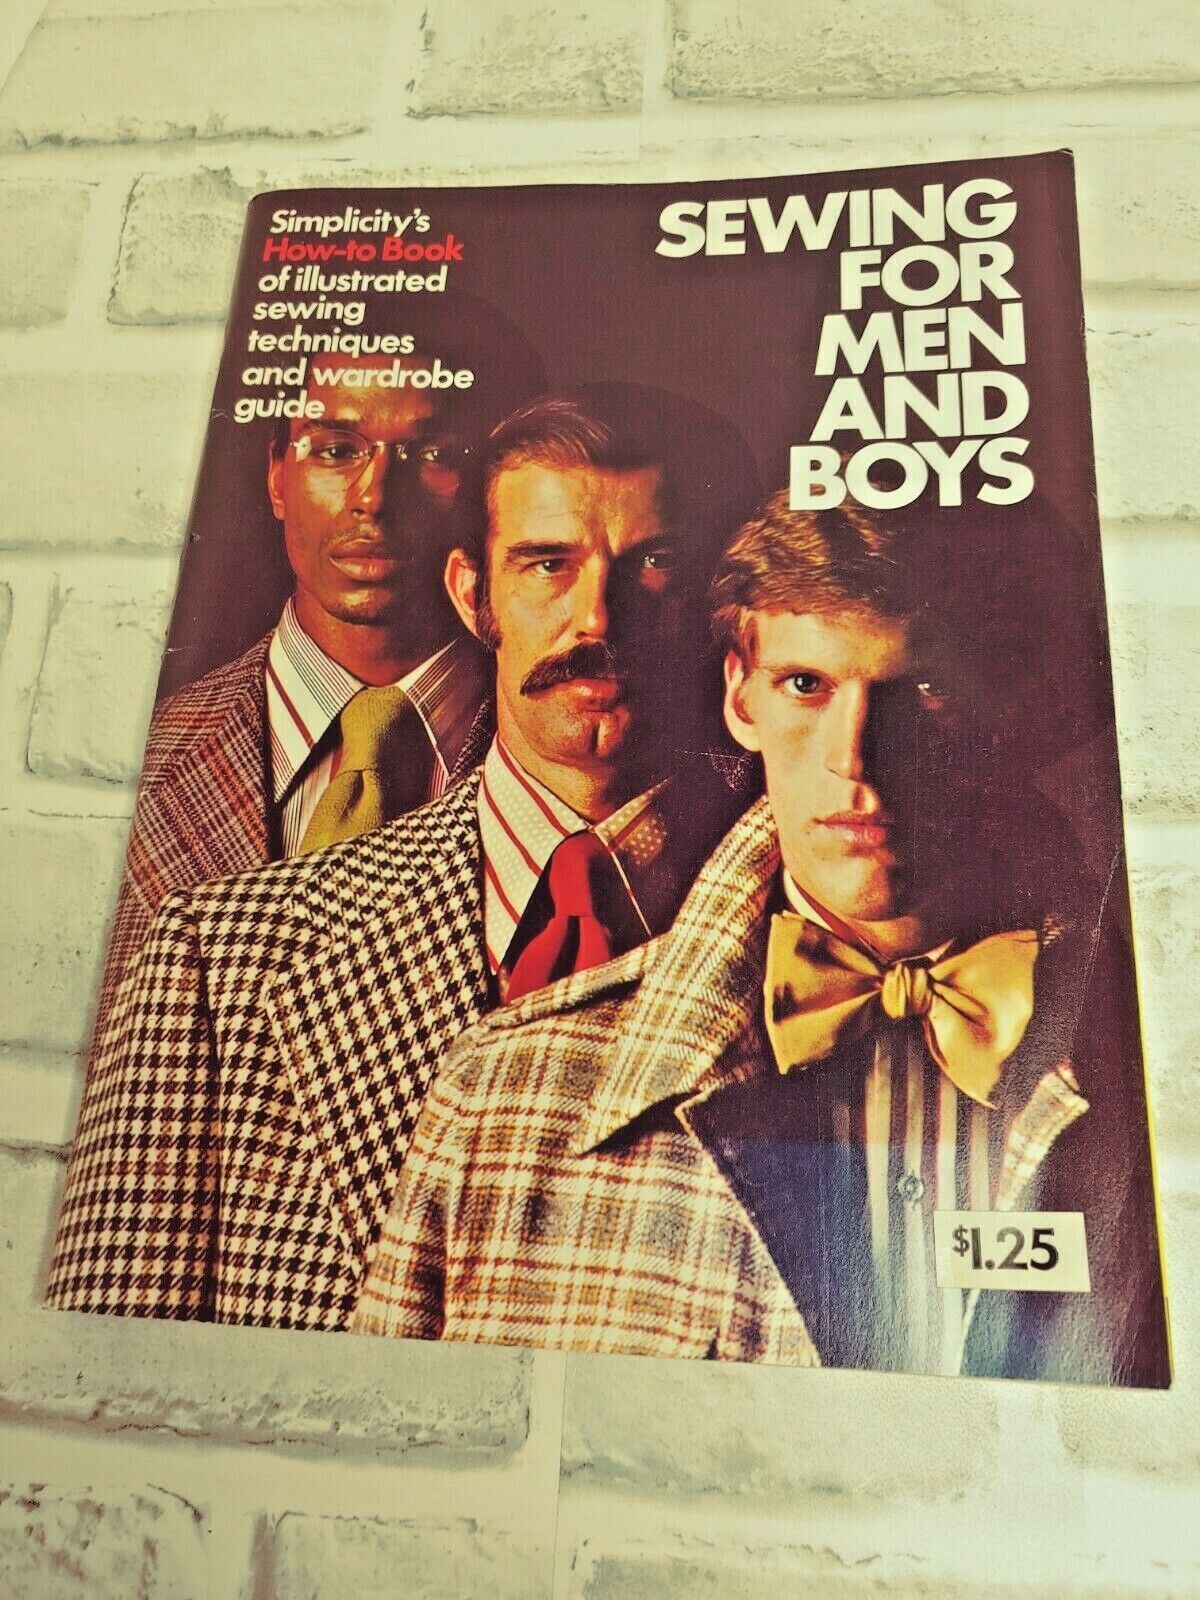 Vintage Simplicity's Sewing For Men and Boys 1973 Illustrated Sewing Techniques